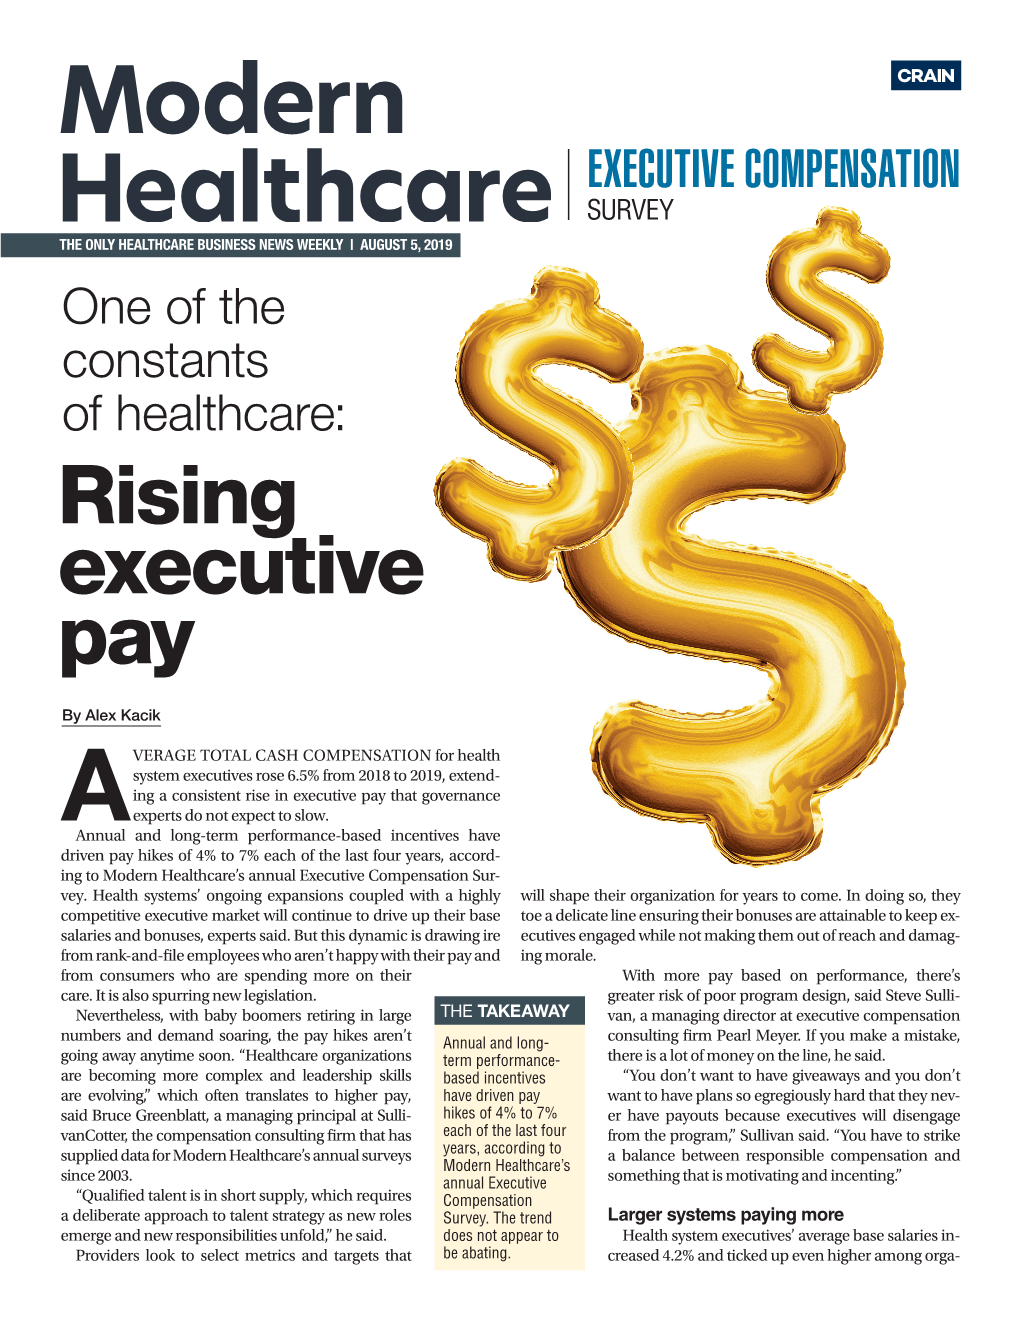 EXECUTIVE COMPENSATION SURVEY the ONLY HEALTHCARE BUSINESS NEWS WEEKLY | August 5, 2019 One of the Constants of Healthcare: Rising Executive Pay